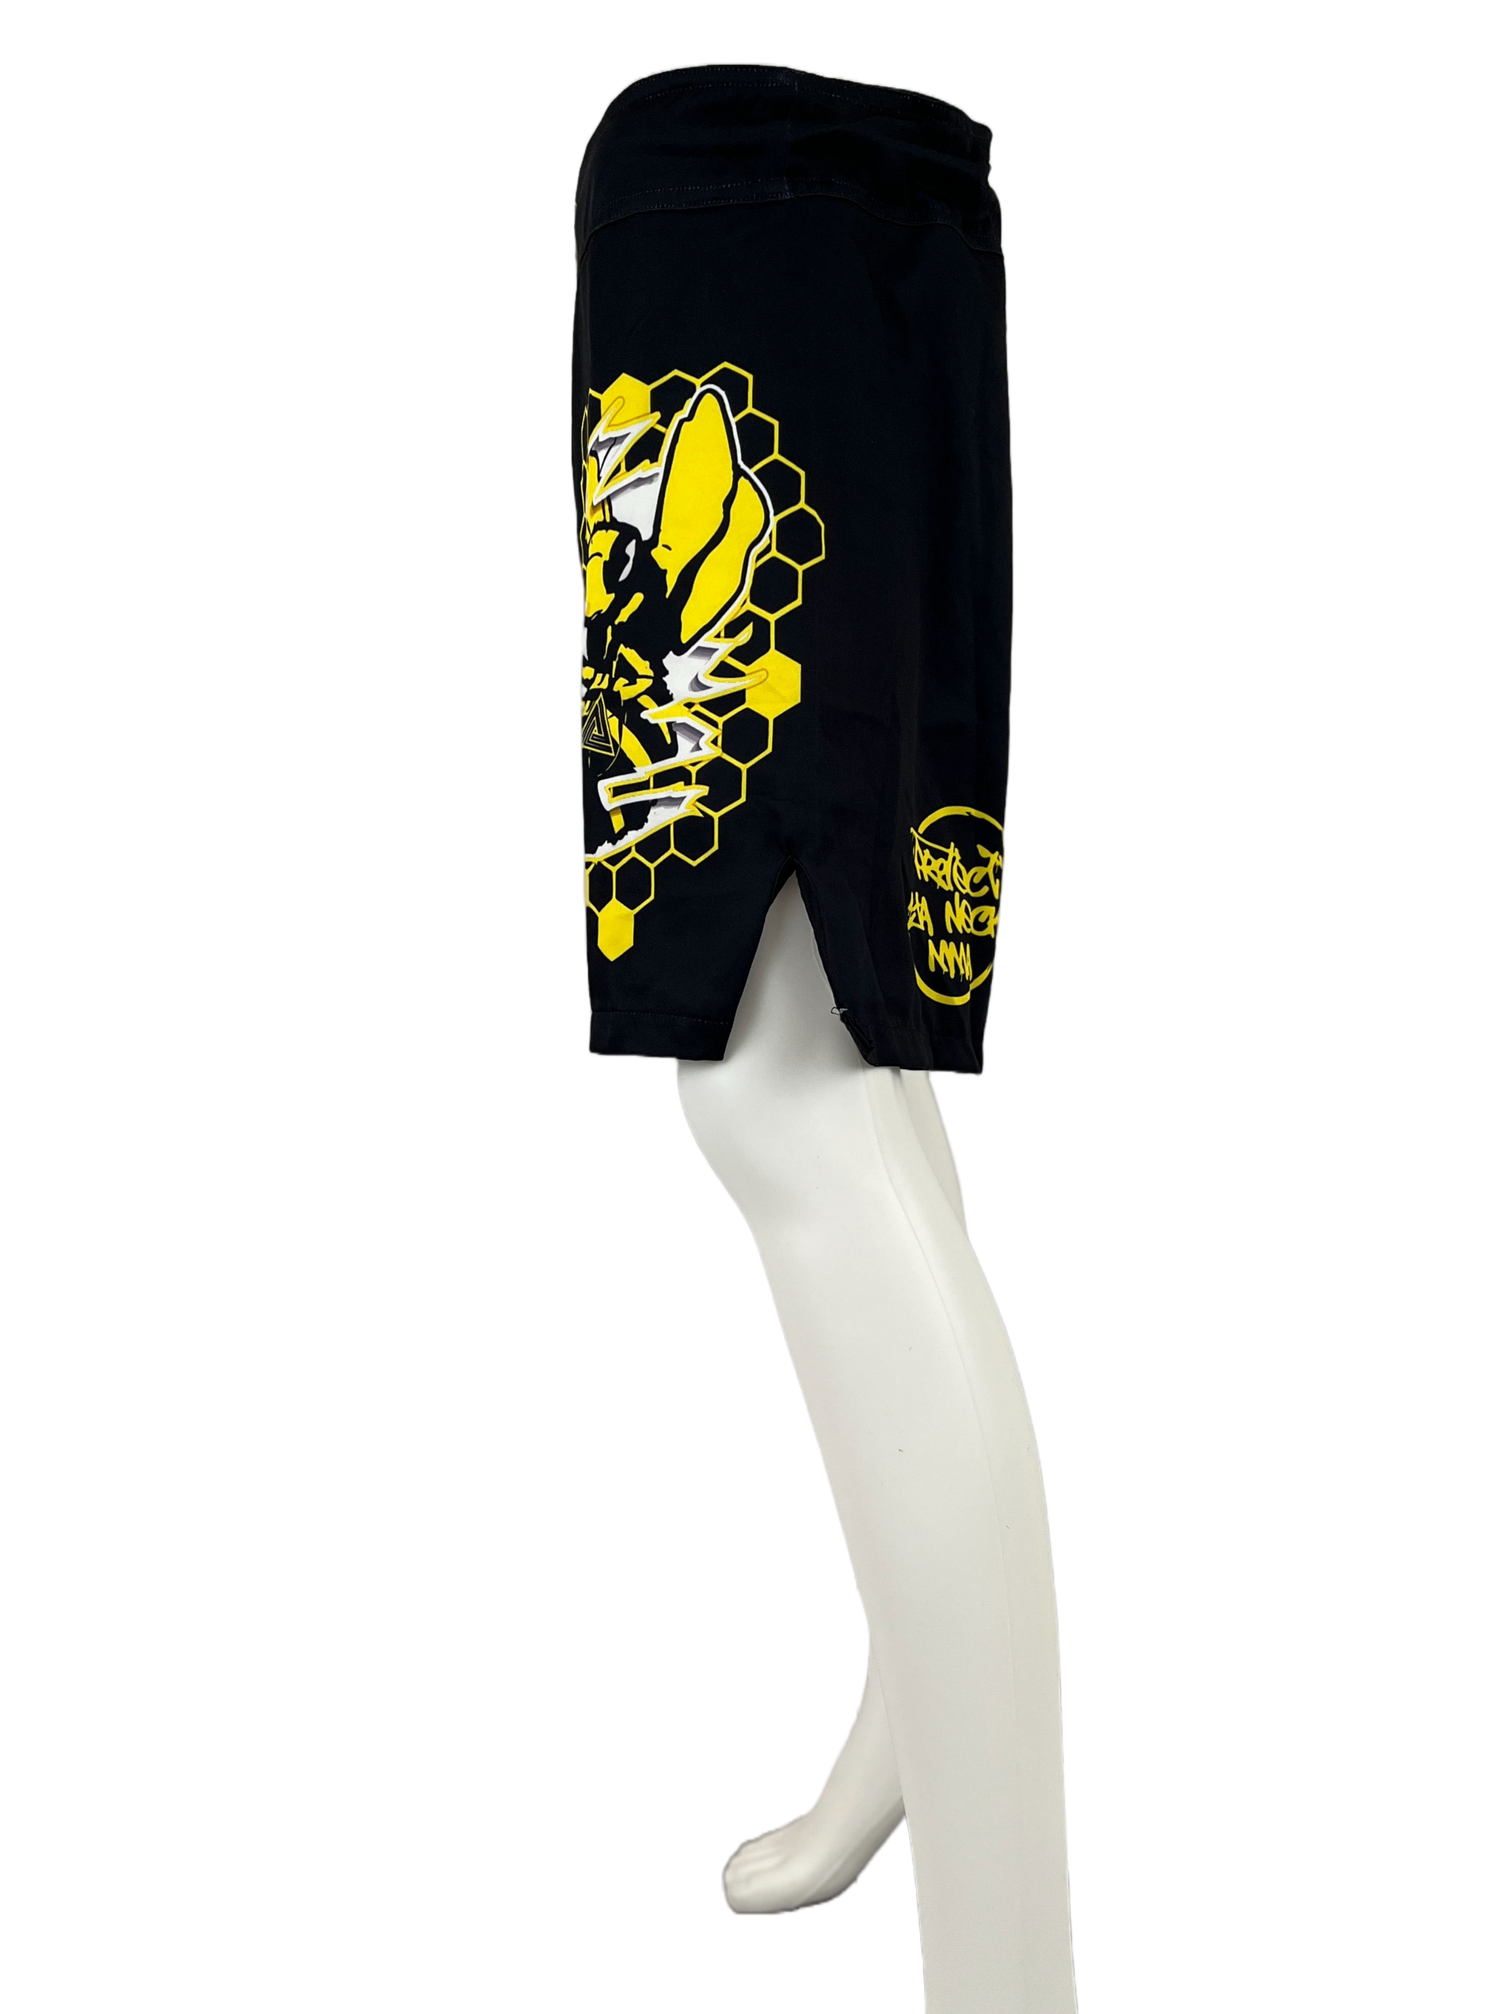 black and yellow loose fit mma shorts for grappling killa bees worldwide killa bee ripping through honeycomb left leg protect ya neck mma back left left side profile